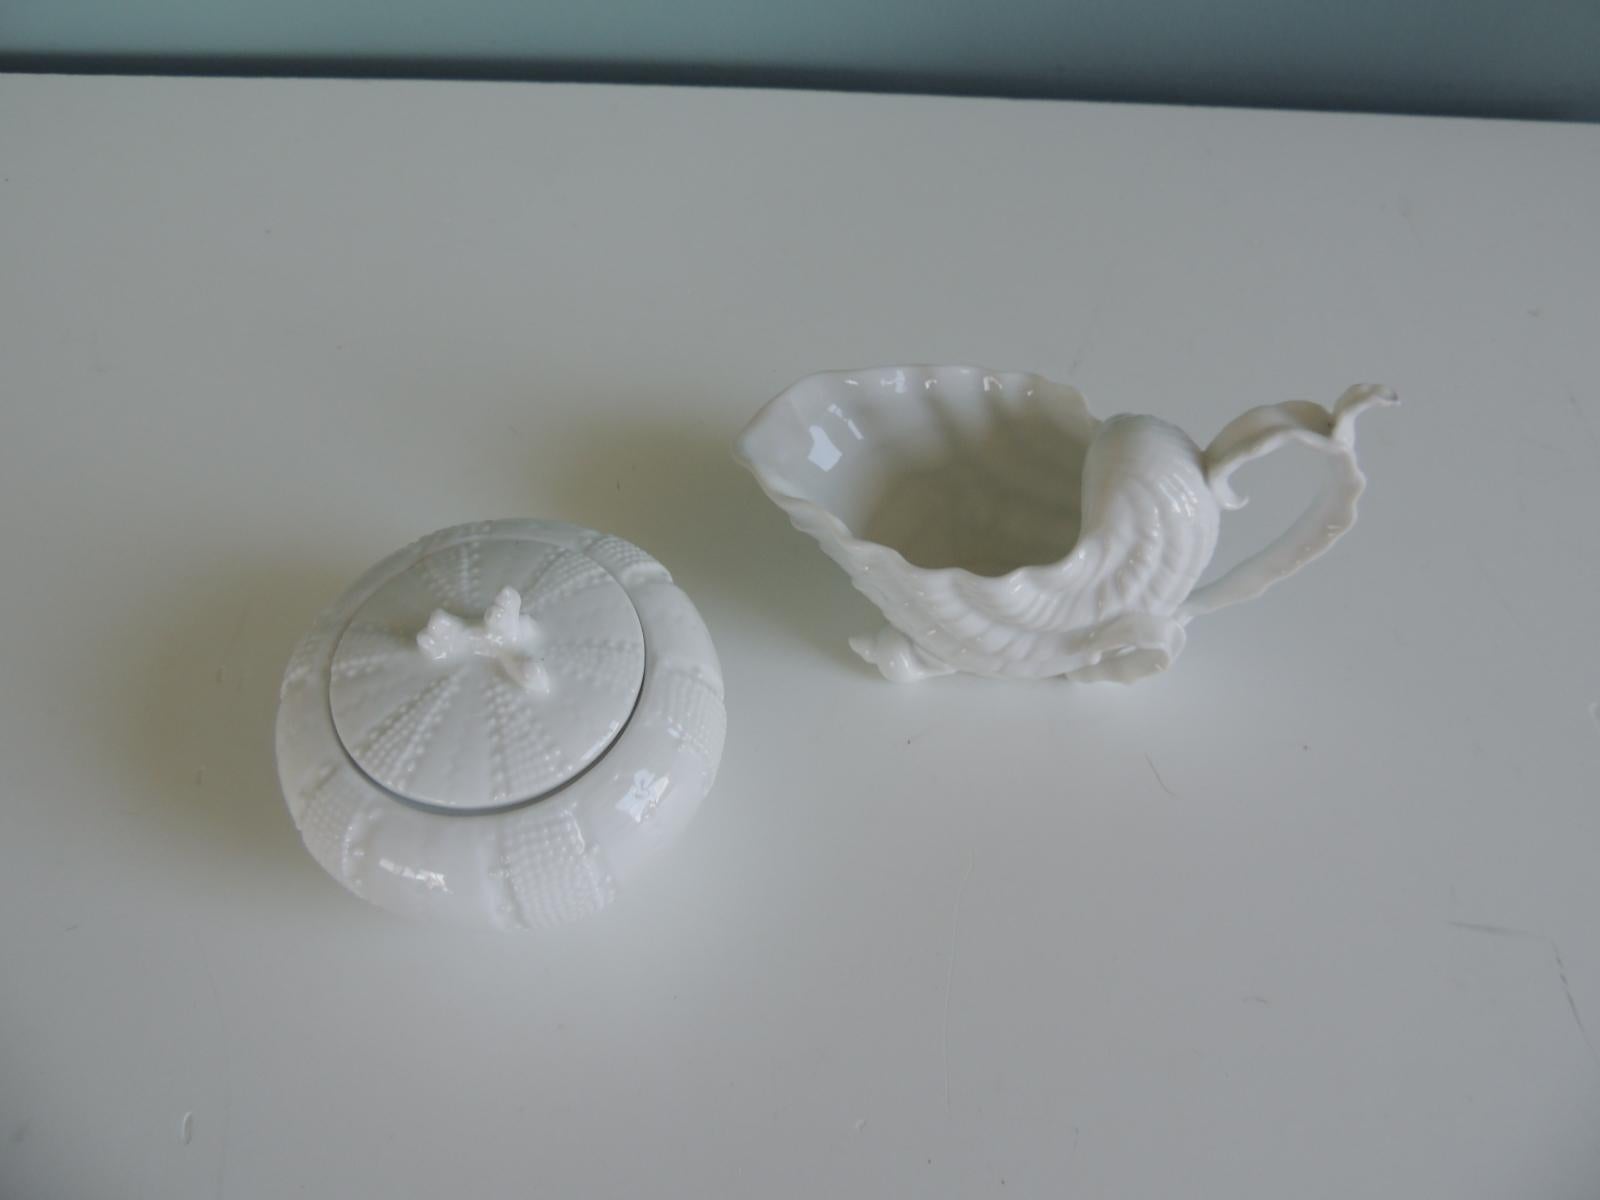 Set of (2) white Nautical Theme Vintage creamer & sugar holders/serving pieces
In the shapes of an urchin and a nautilus seashell creamer
Sizes: Urchin is 4